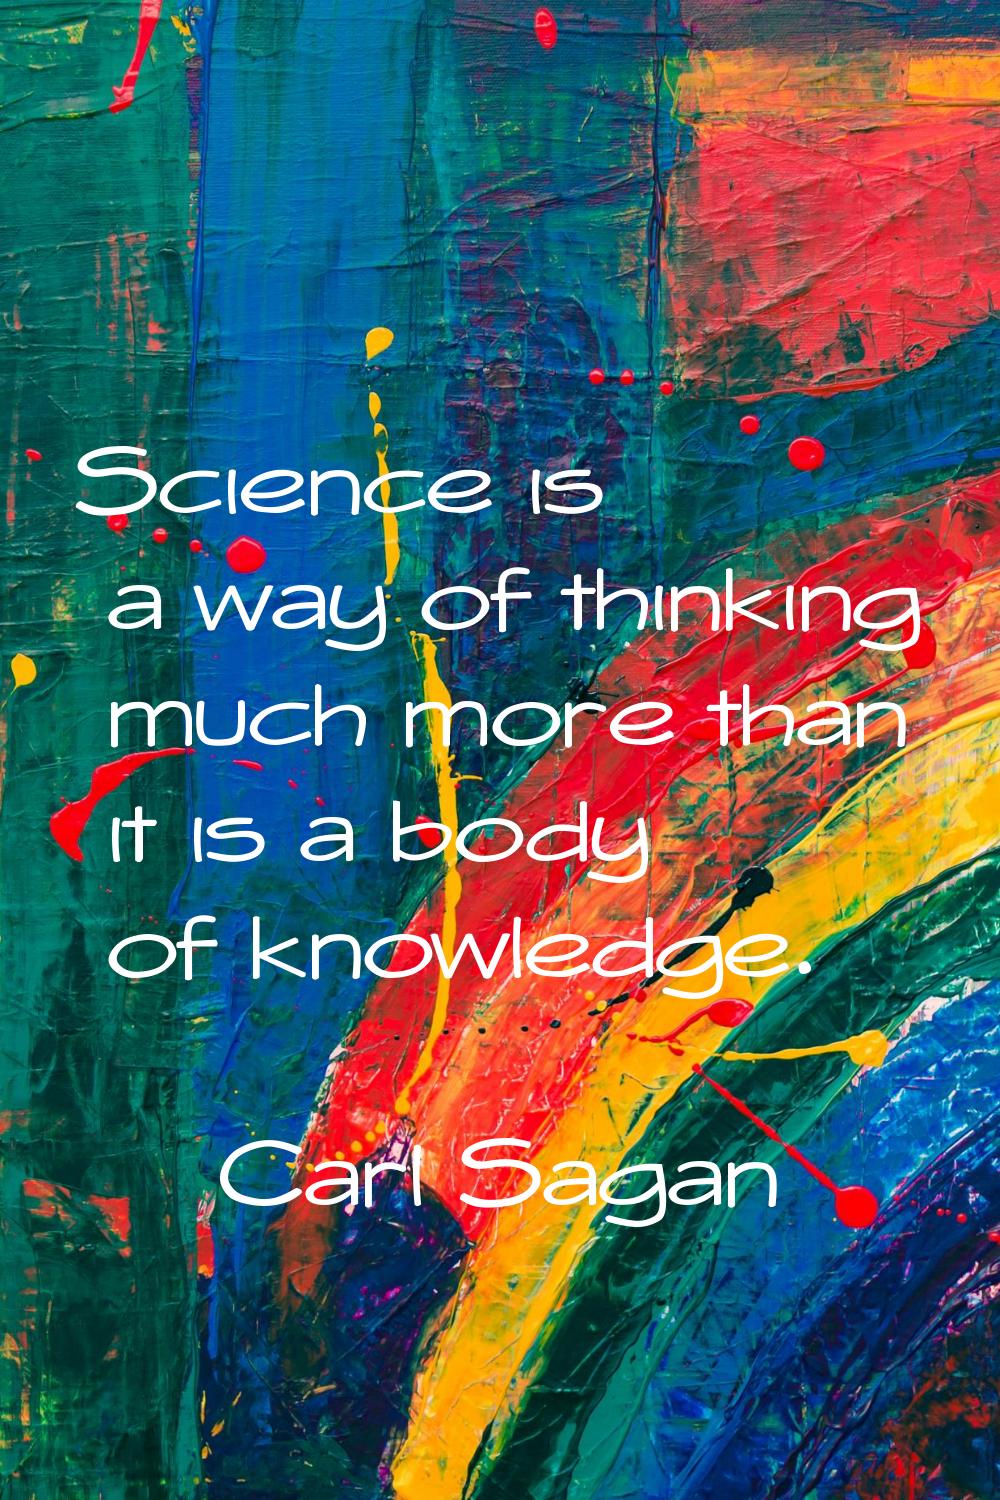 Science is a way of thinking much more than it is a body of knowledge.